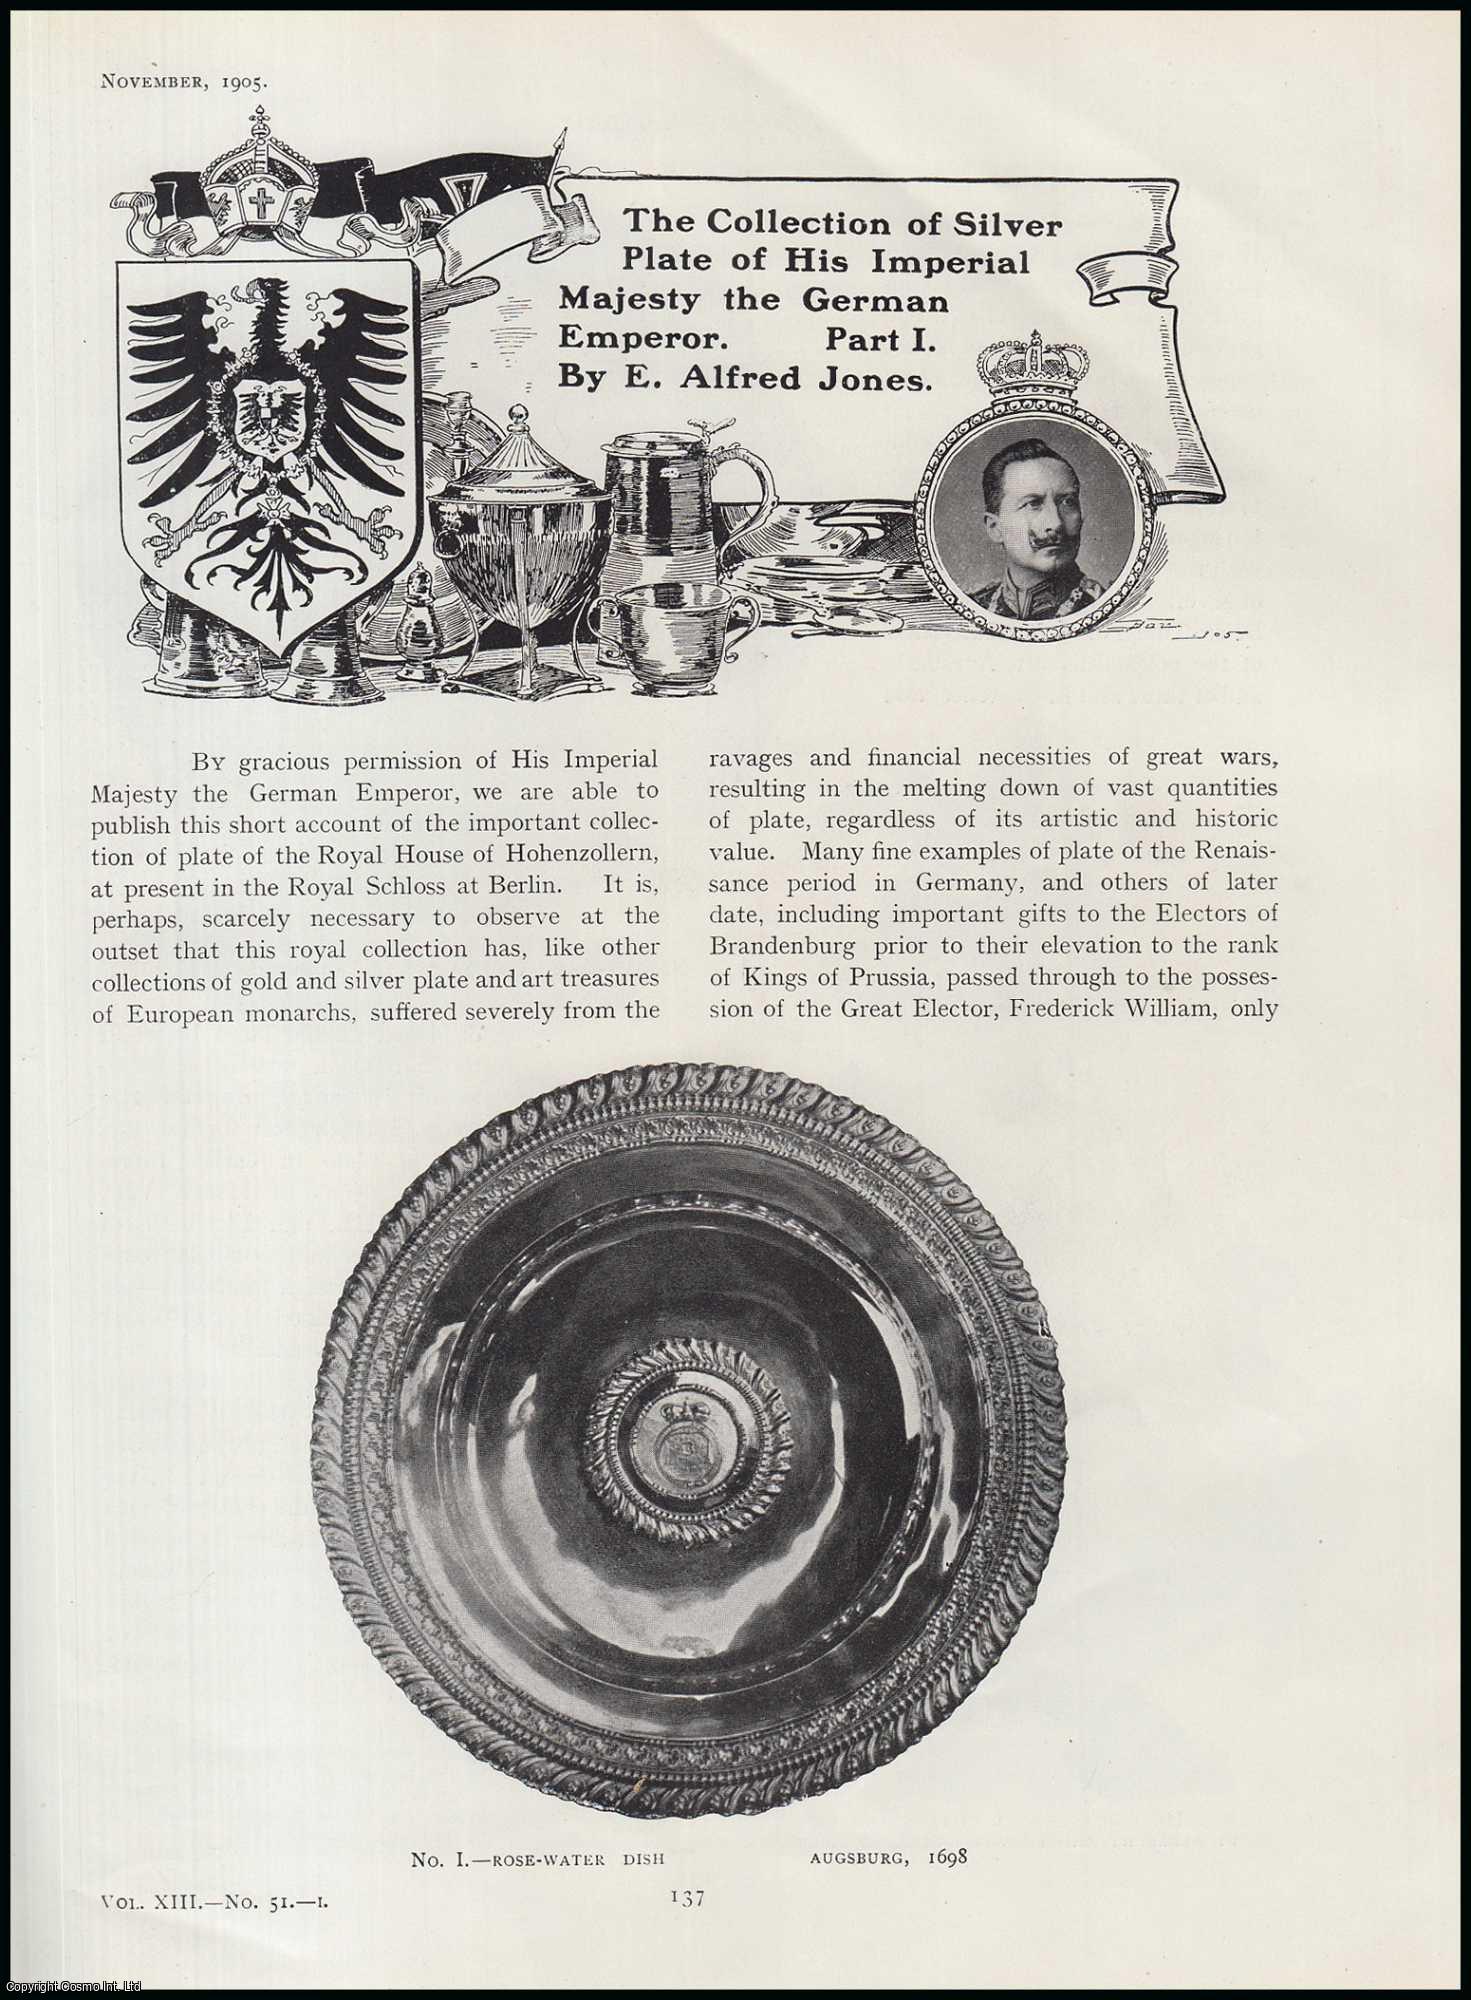 E. Alfred Jones - The Collection of Silver Plate (part 1) of His Imperial Majesty The German Emperor. An original article from The Connoisseur, 1905.